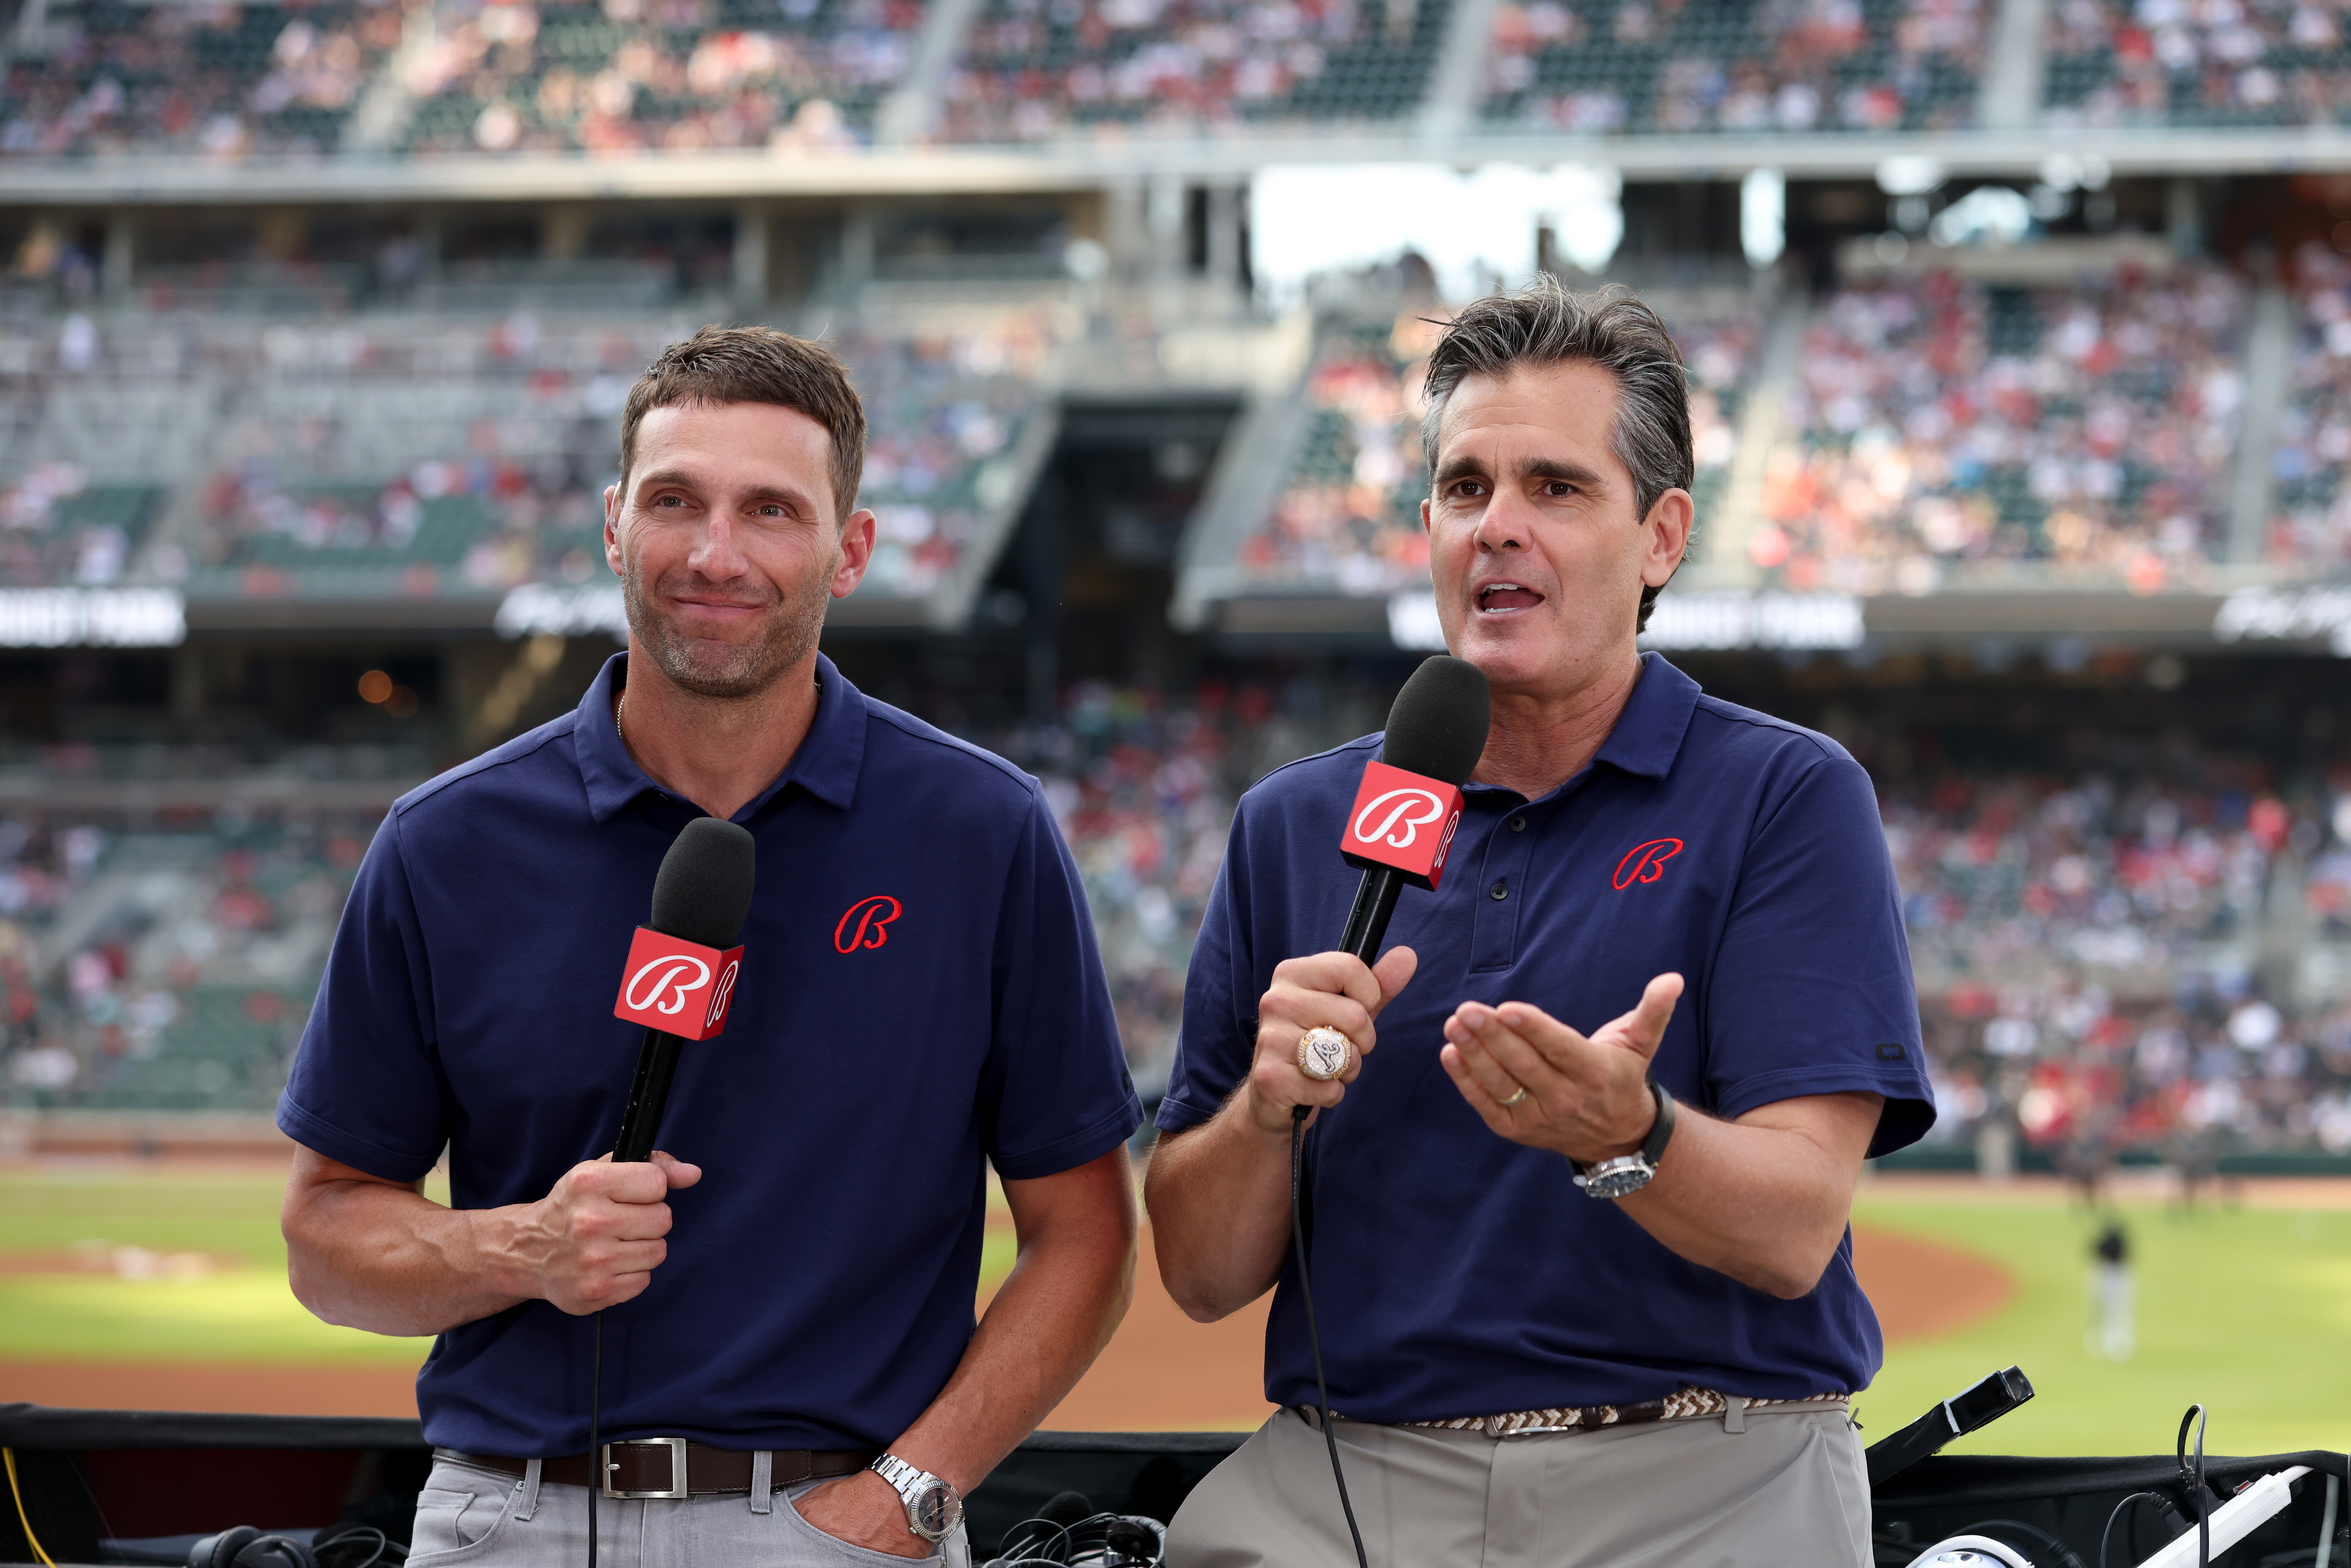 Braves broadcaster Jeff Francoeur is getting his own 'Frenchy